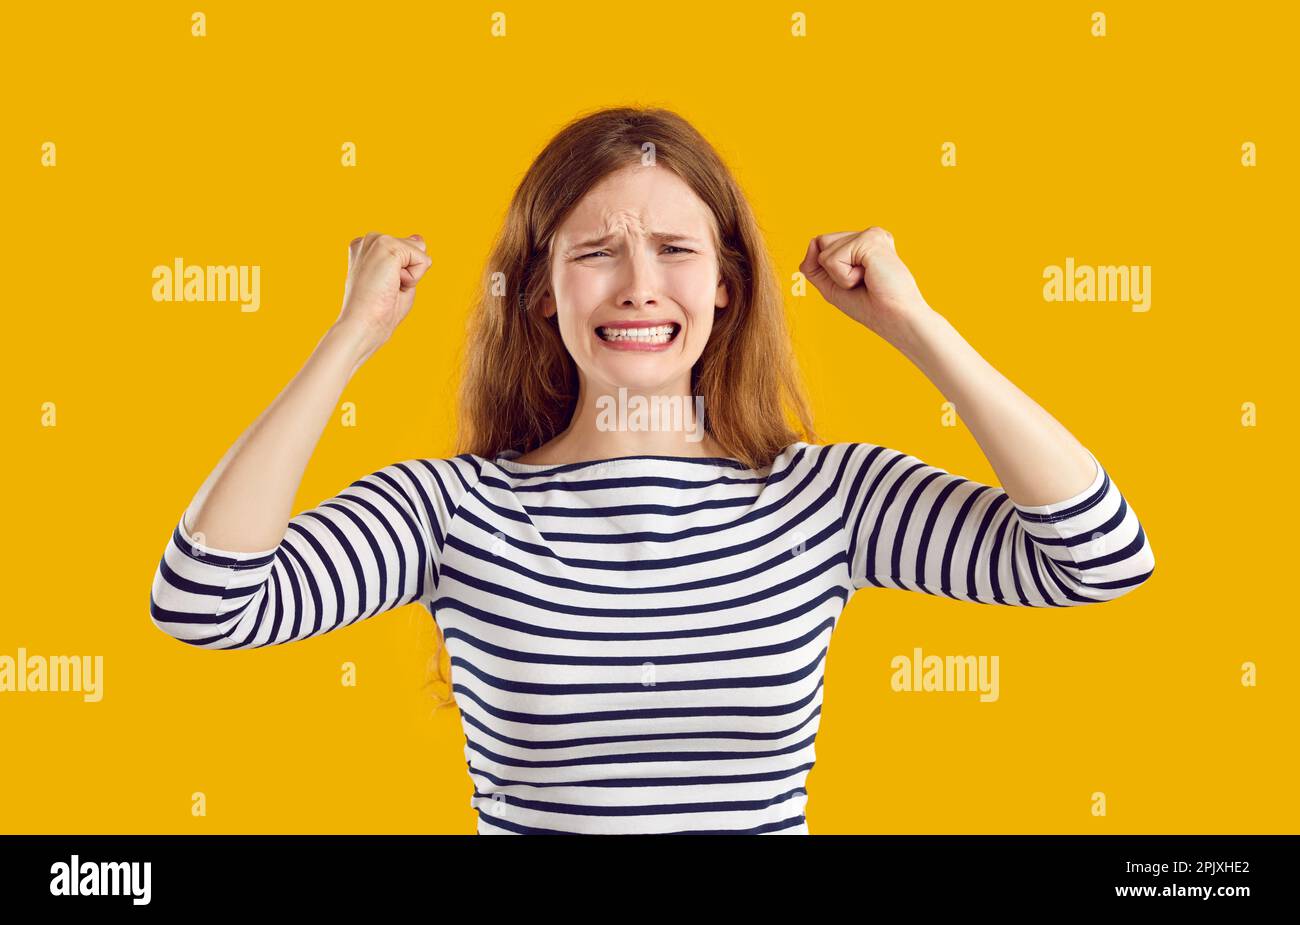 Young sad confused frustrated woman in trouble clenches her fists in despair on yellow background. Stock Photo